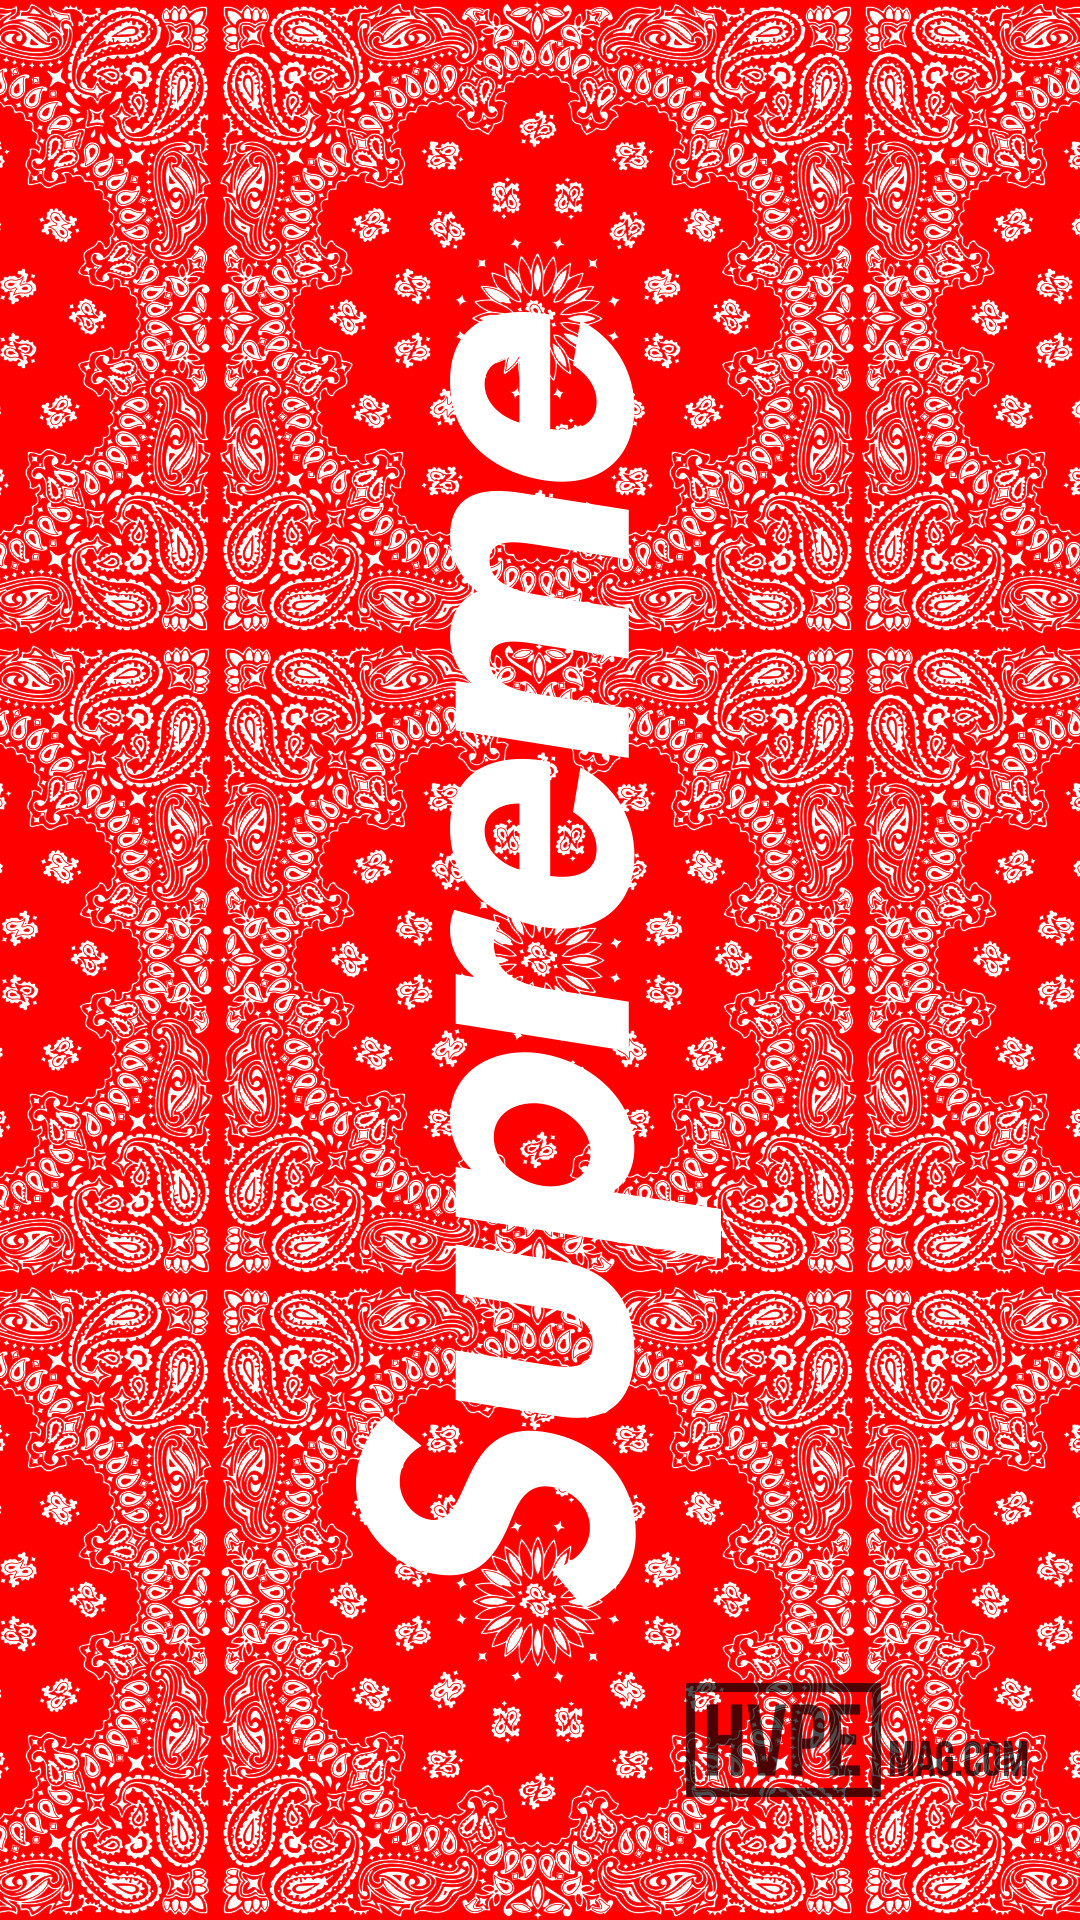 Gucci iPhone Supreme Wallpapers - Wallpaper Cave